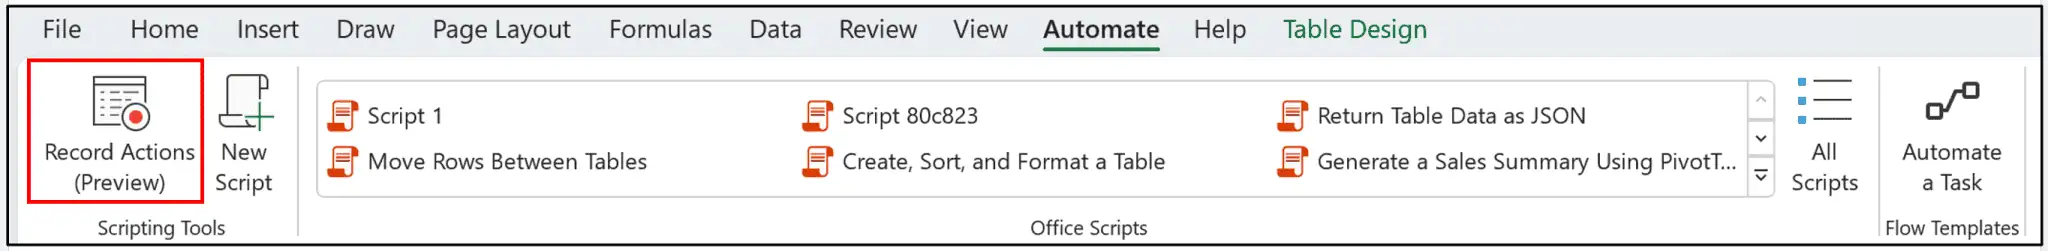 Excel Record Actions option